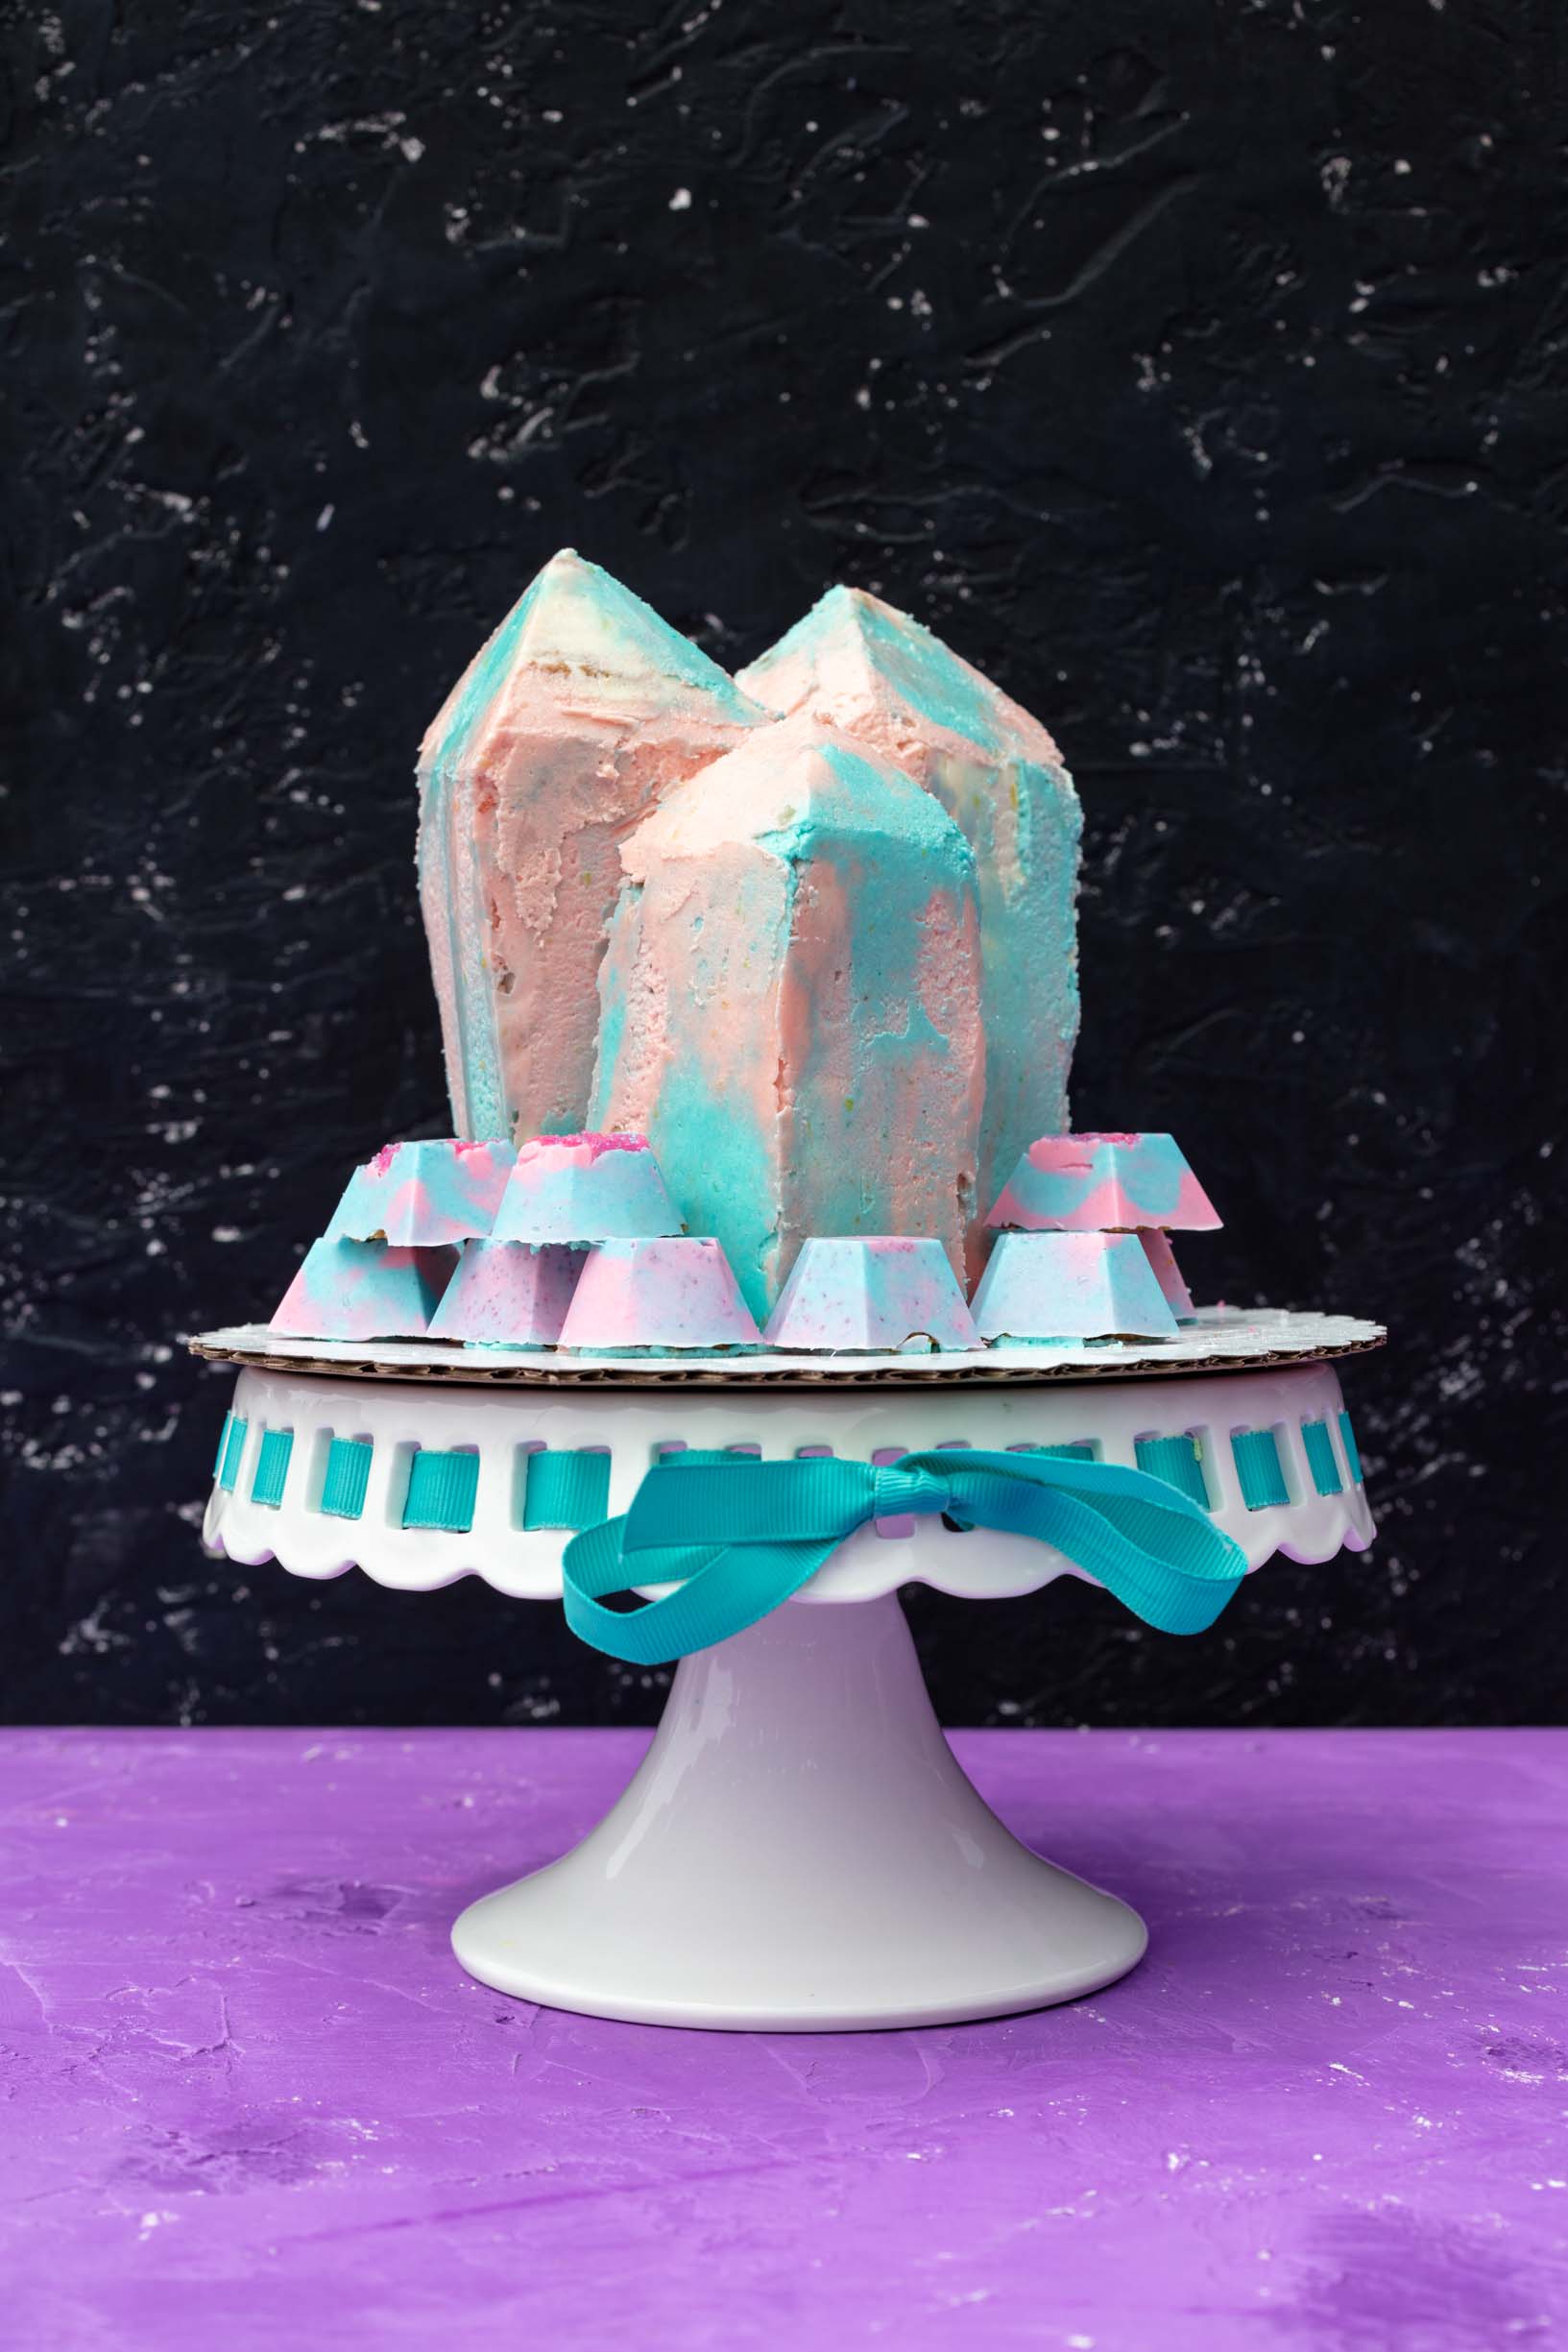 the other side of the vegan loquat crystal cluster cake with trans colored lemon frosting